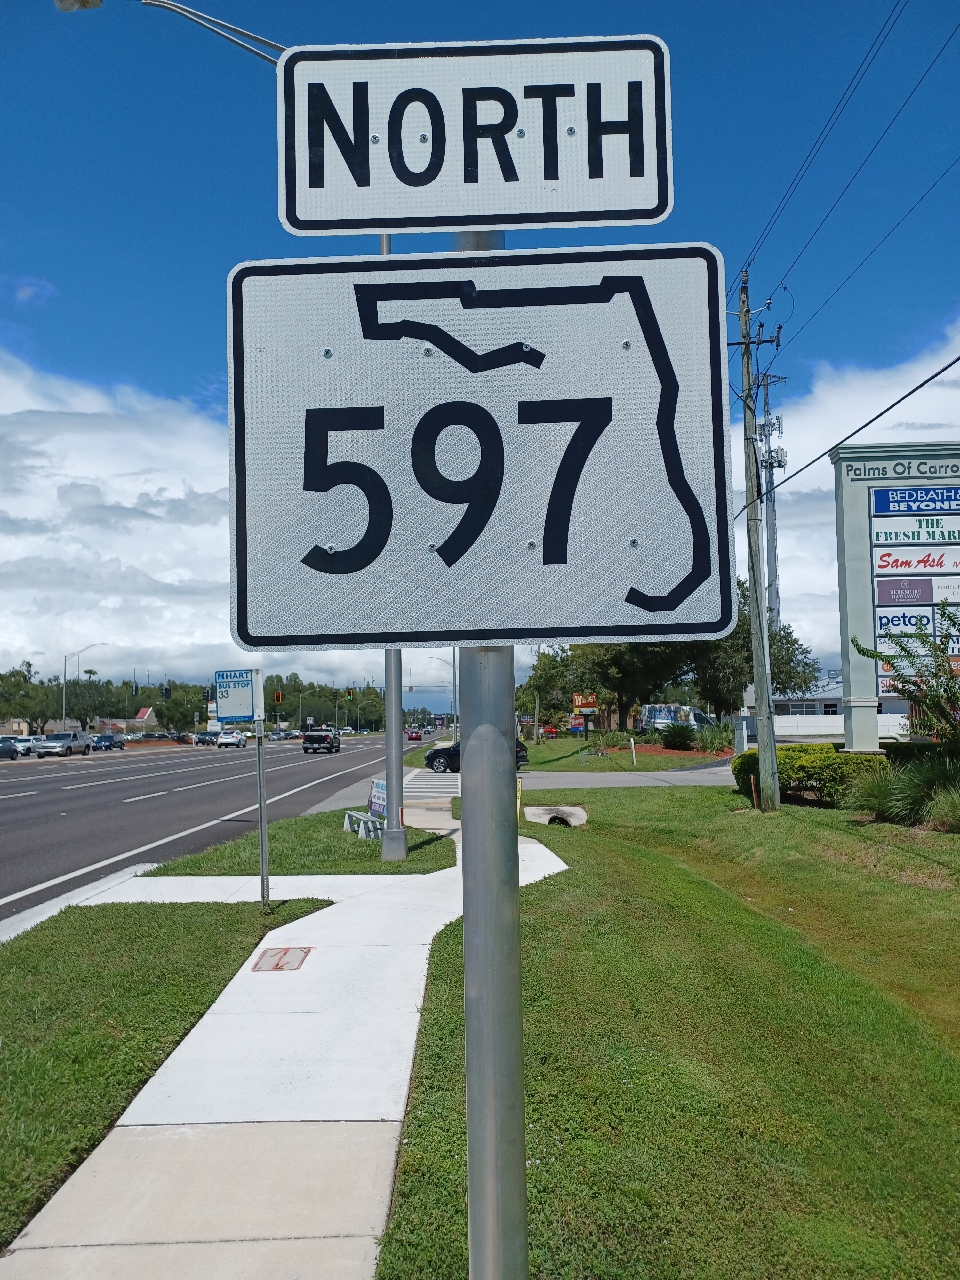 New Florida State Road 597 marker at Carrollwood